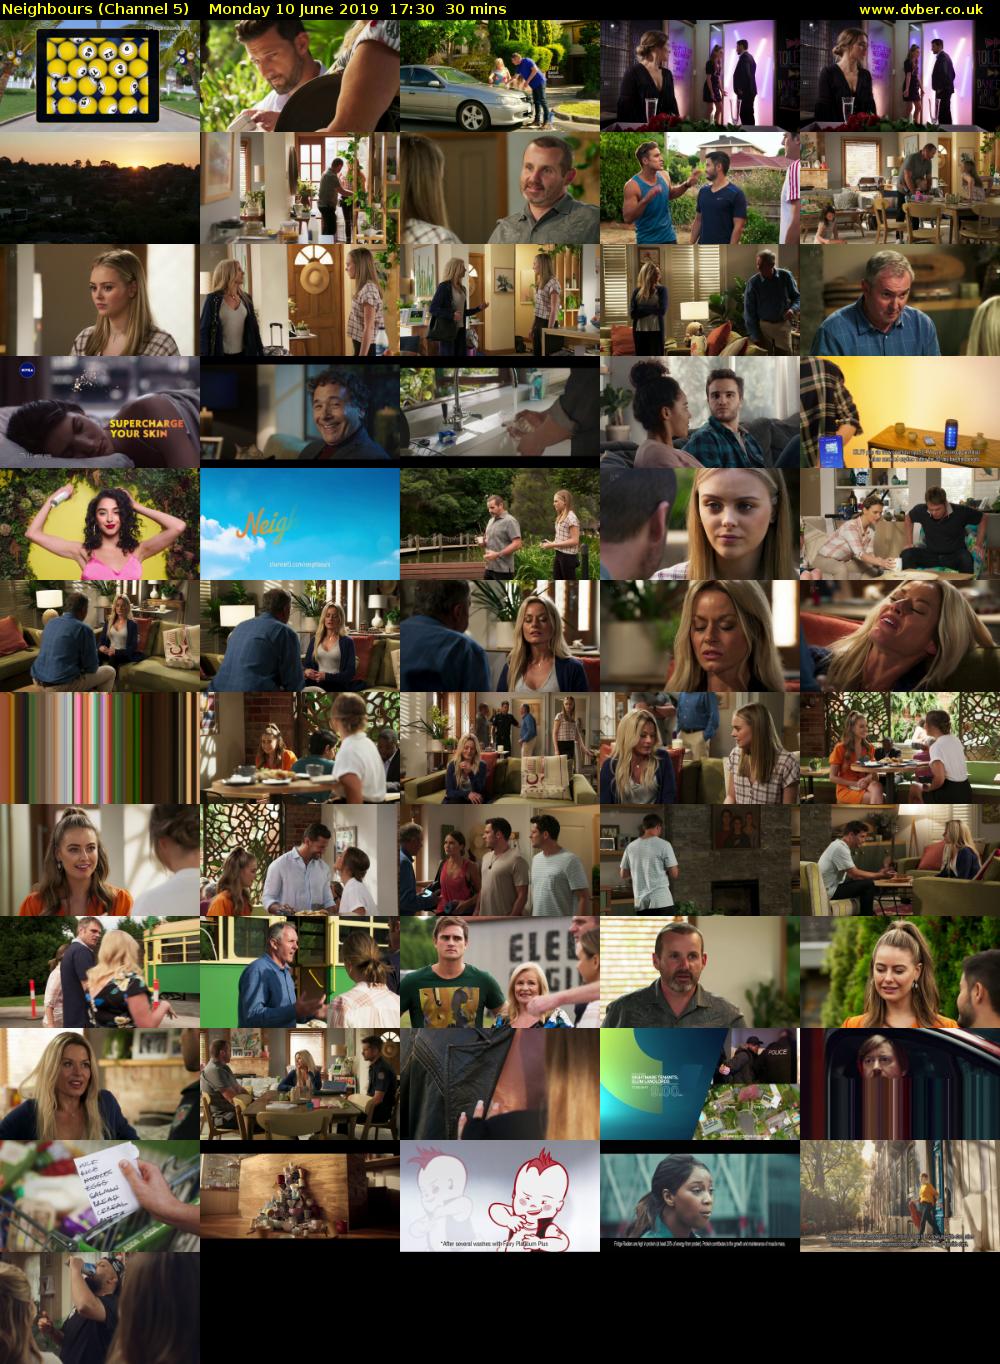 Neighbours (Channel 5) Monday 10 June 2019 17:30 - 18:00